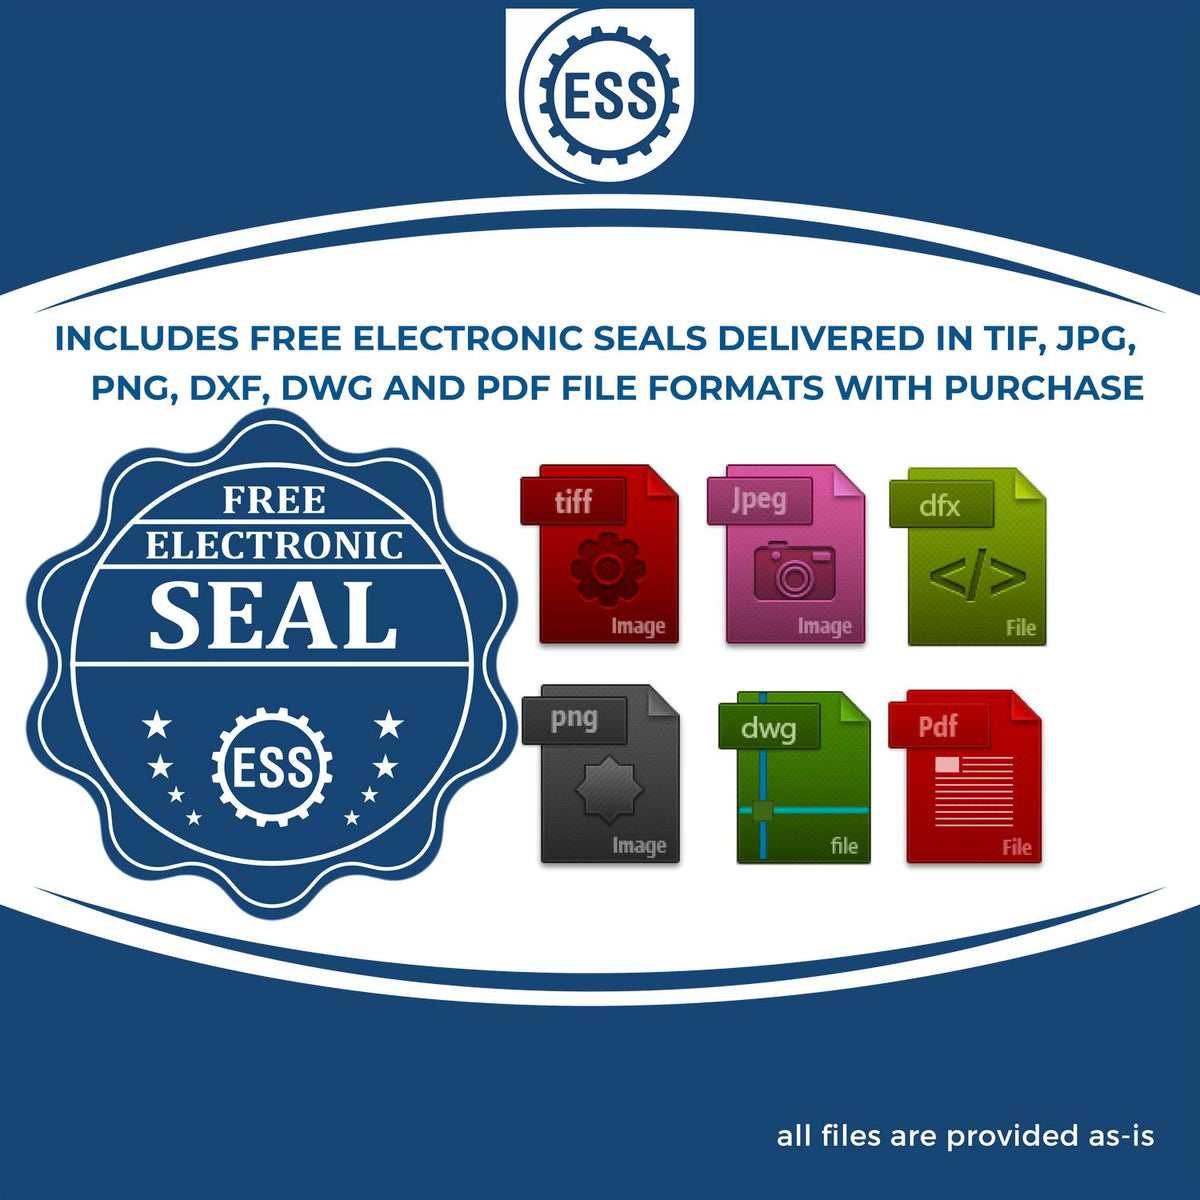 An infographic for the free electronic seal for the Soft New York Professional Engineer Seal illustrating the different file type icons such as DXF, DWG, TIF, JPG and PNG.